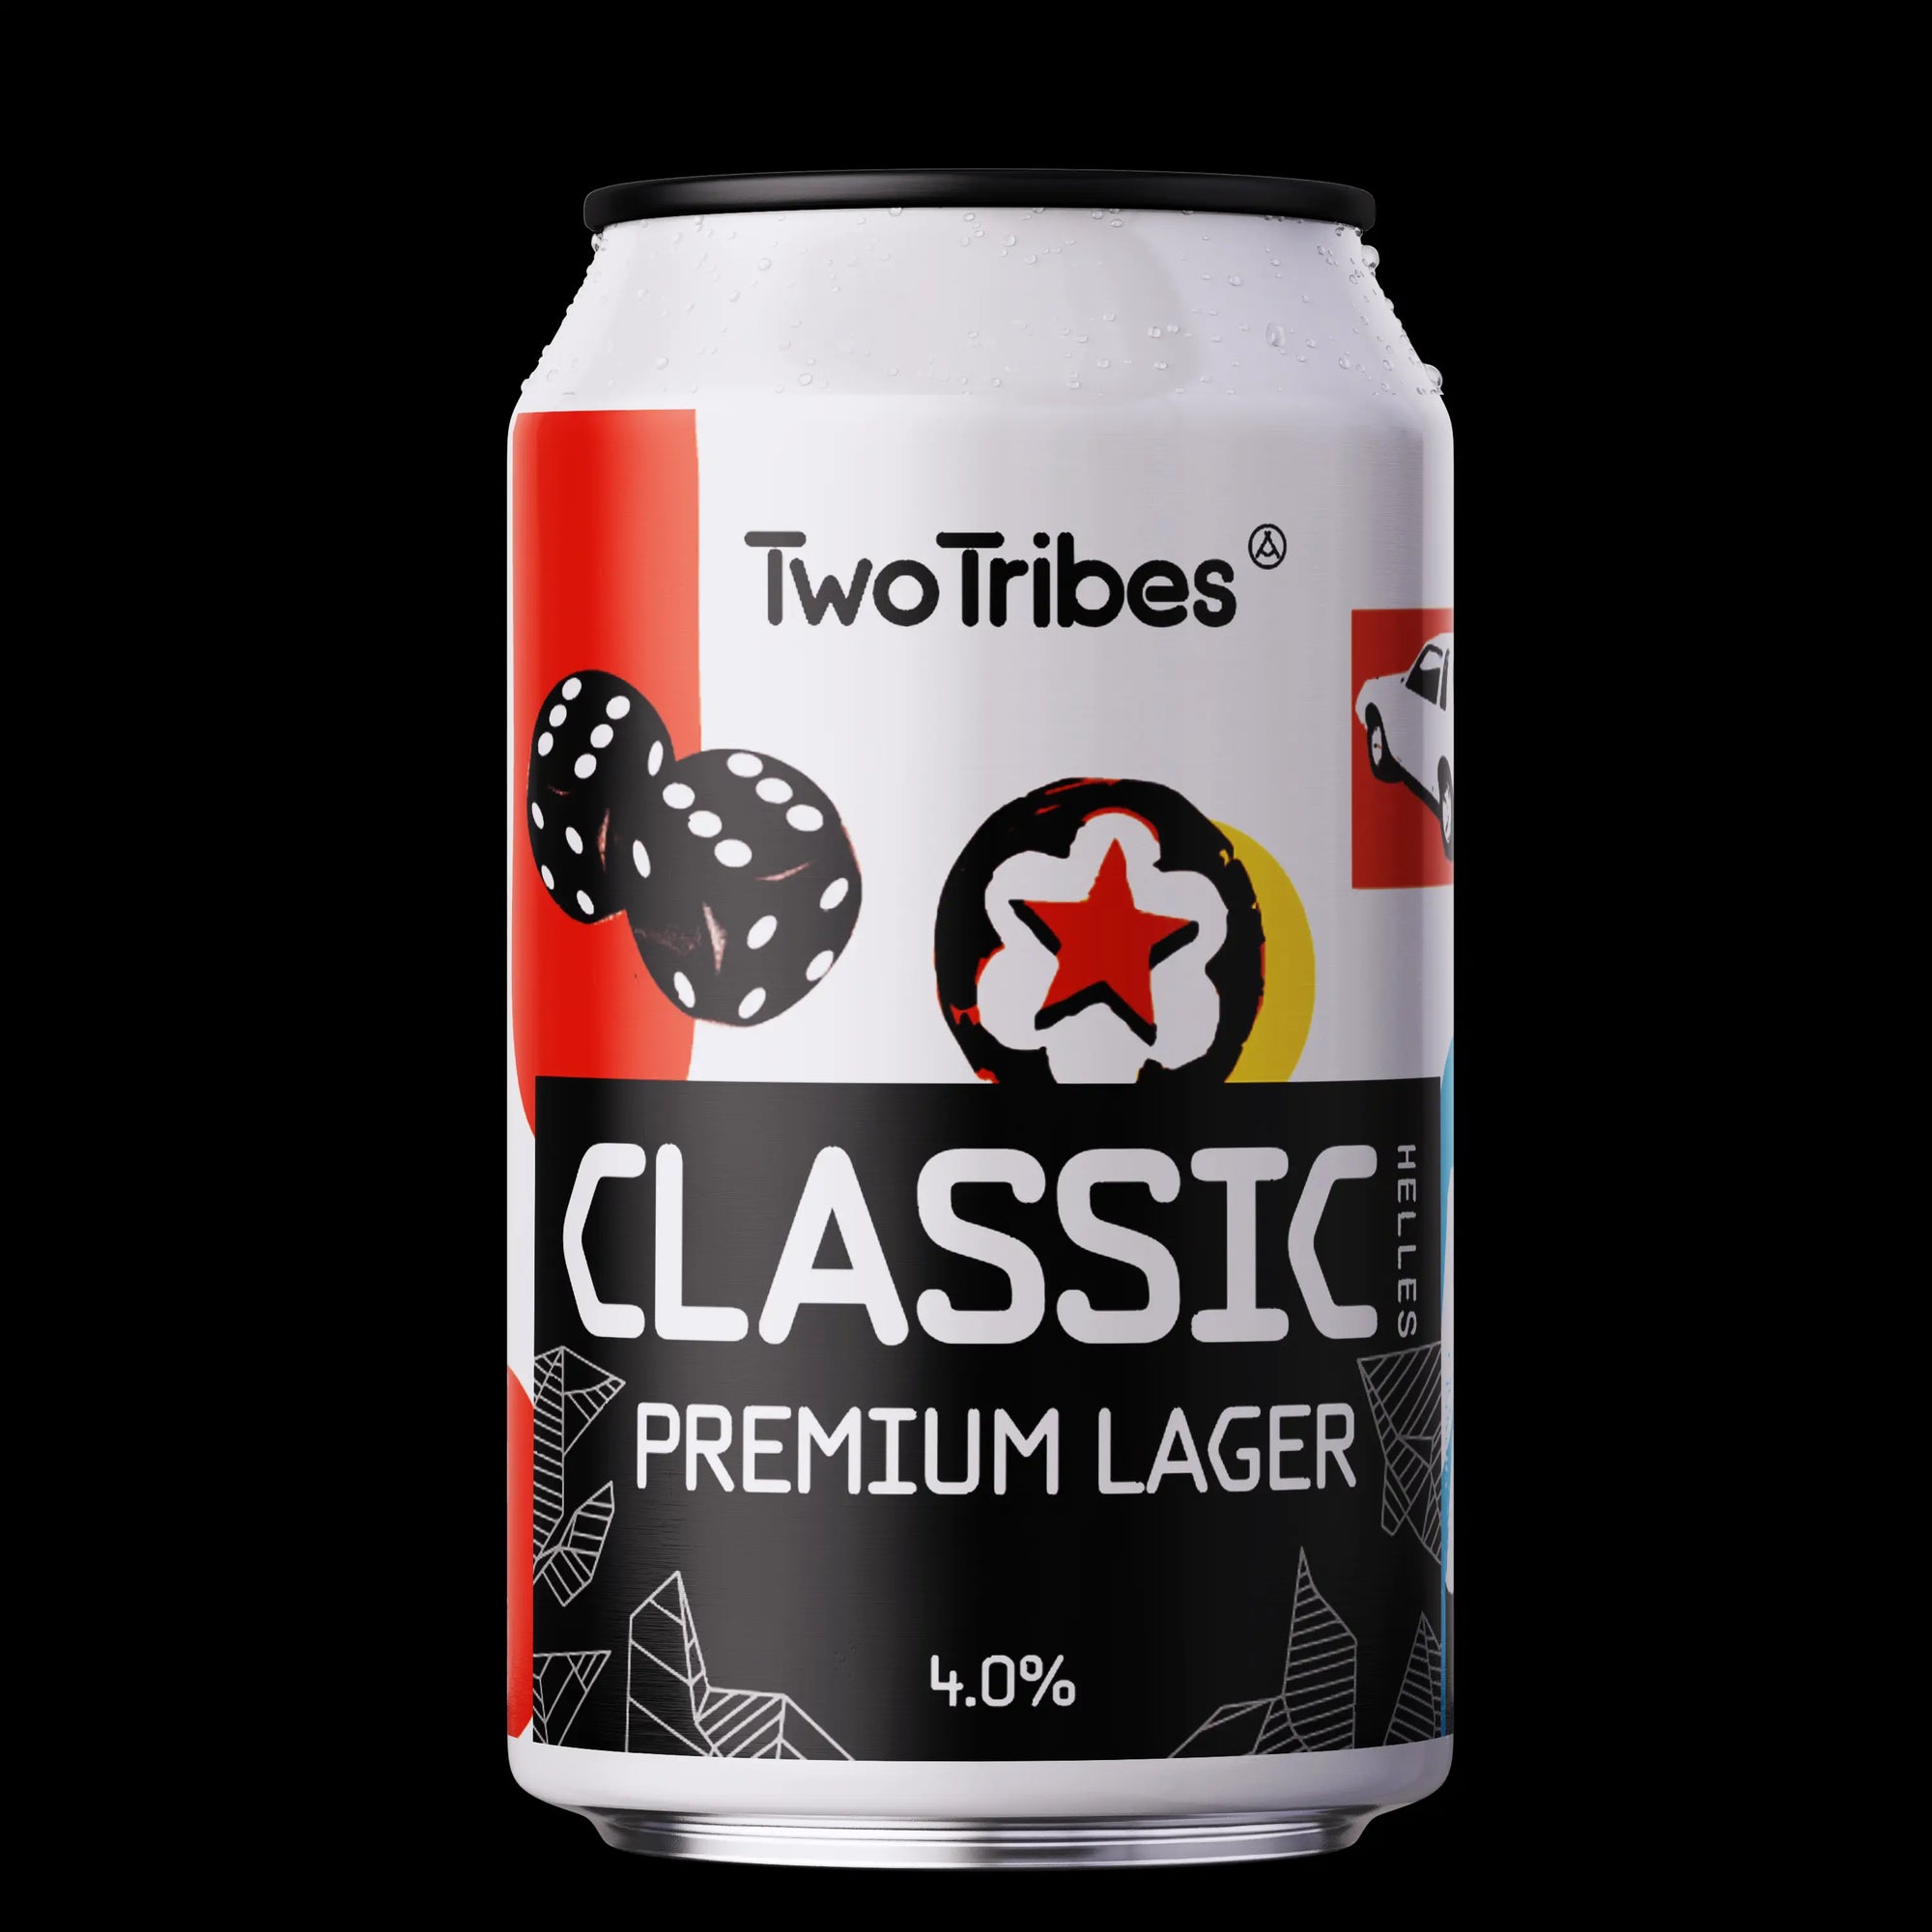 CLASSIC > Helles Lager